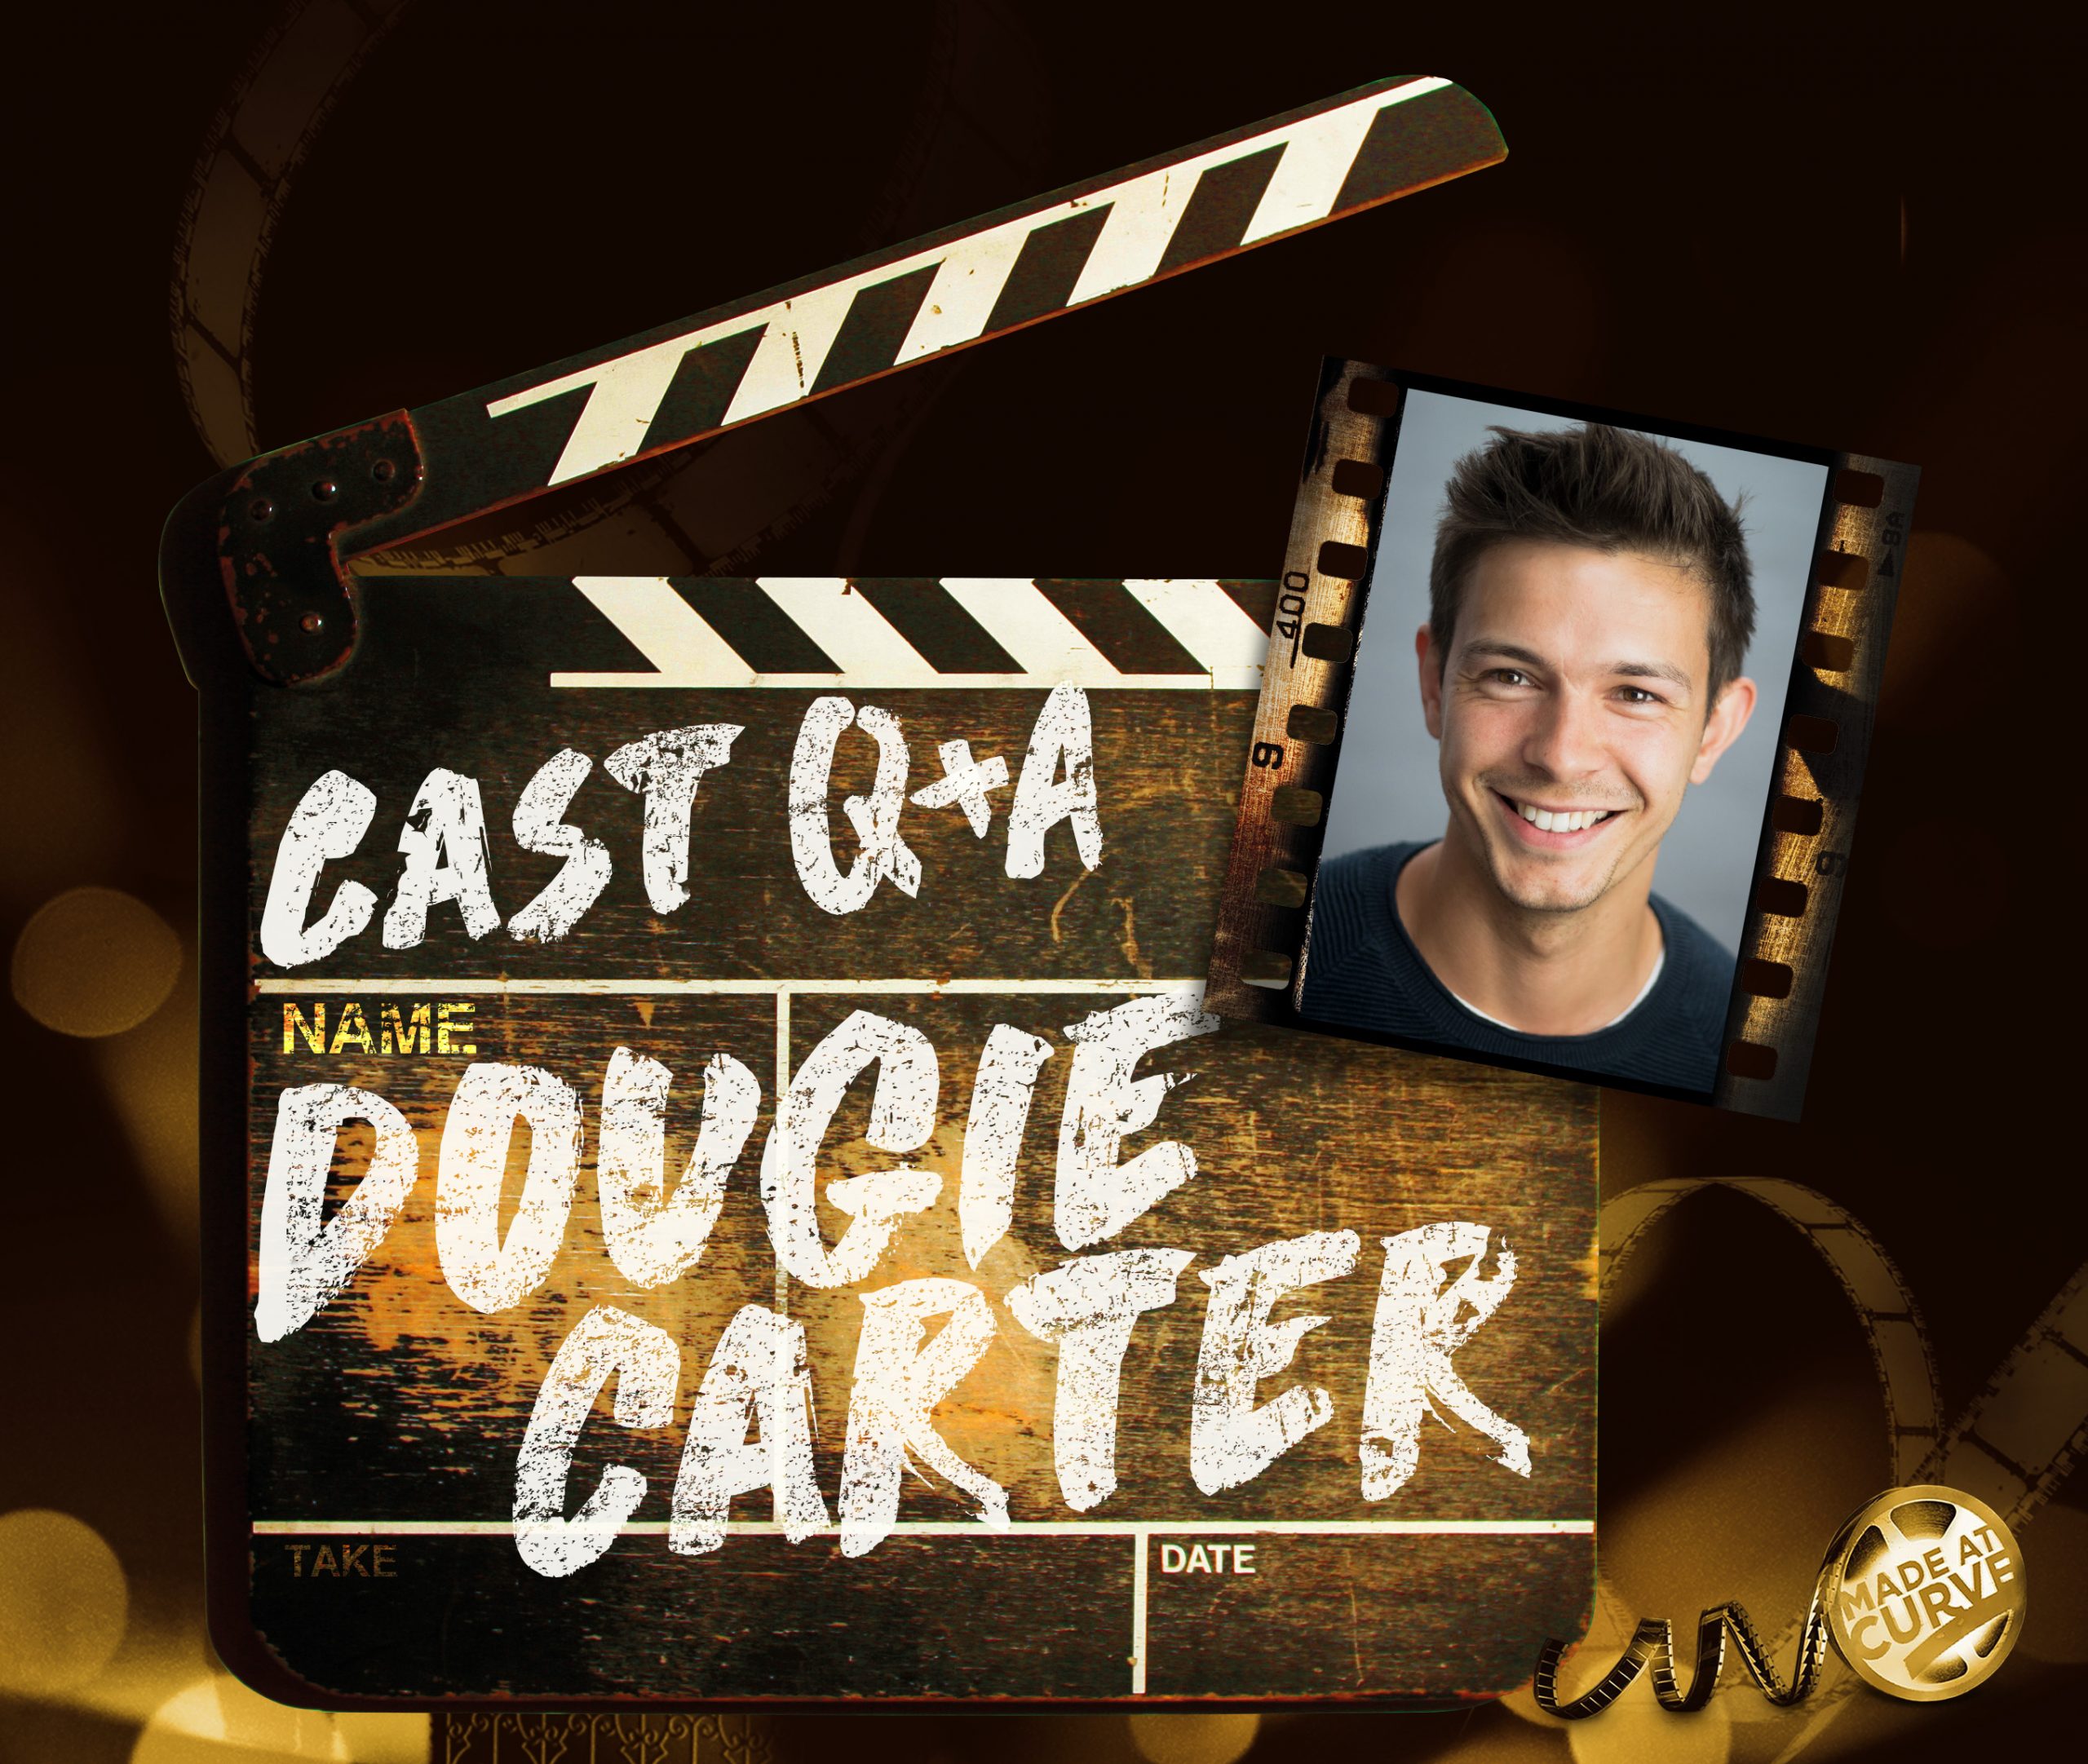 Promotional artwork for our Cast Q&A series. Dougie Carter's headshot sits on a sepia clapperboard and background. Text: Cast Q&A, Dougie Carter..